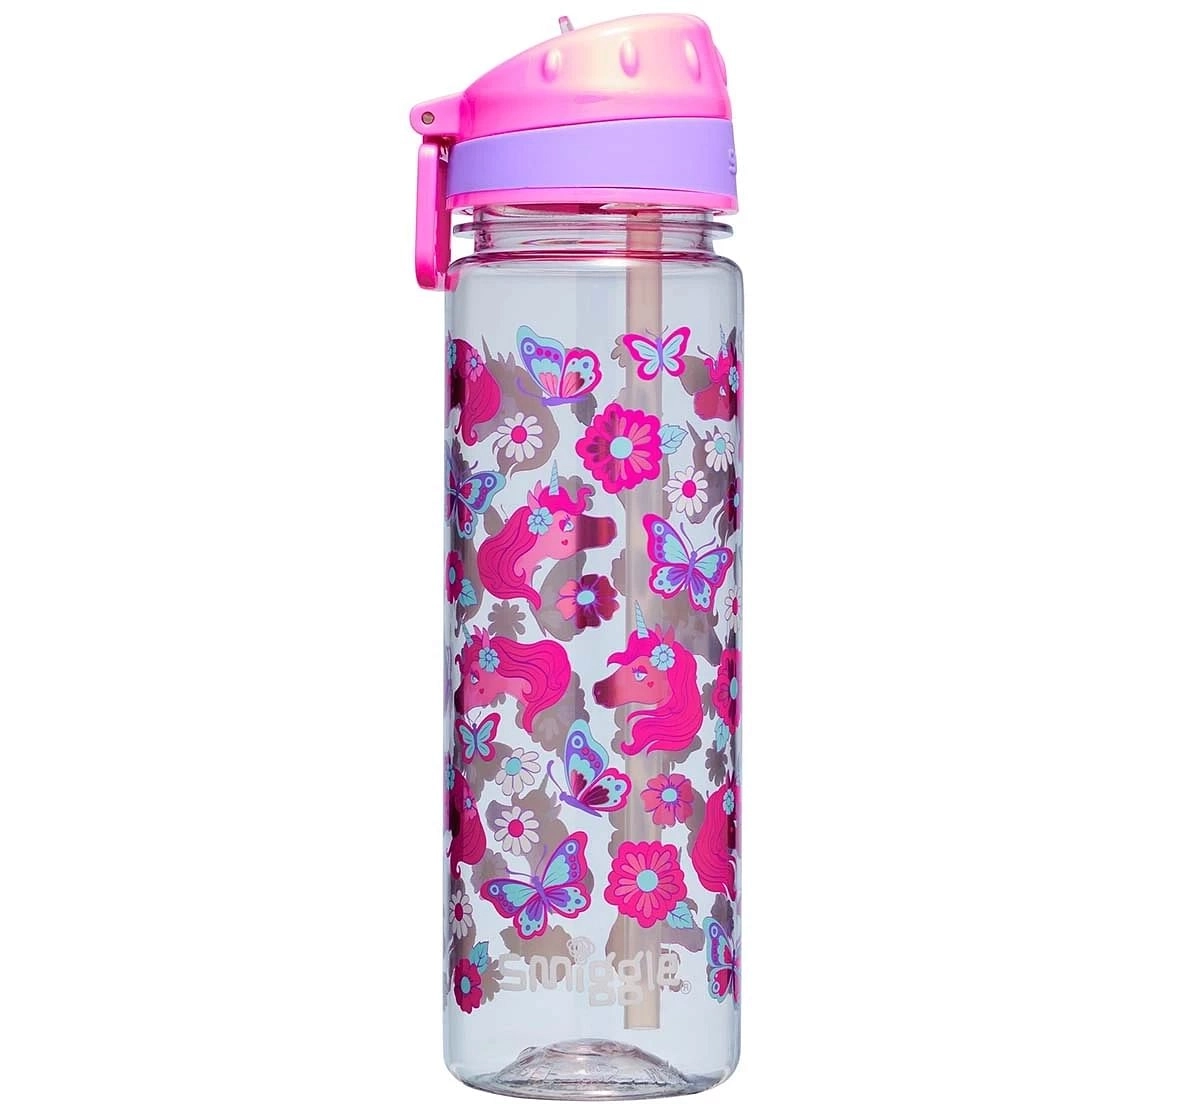 Smiggle Hey There Collection Bottles Plastic, Pink, 4Y+